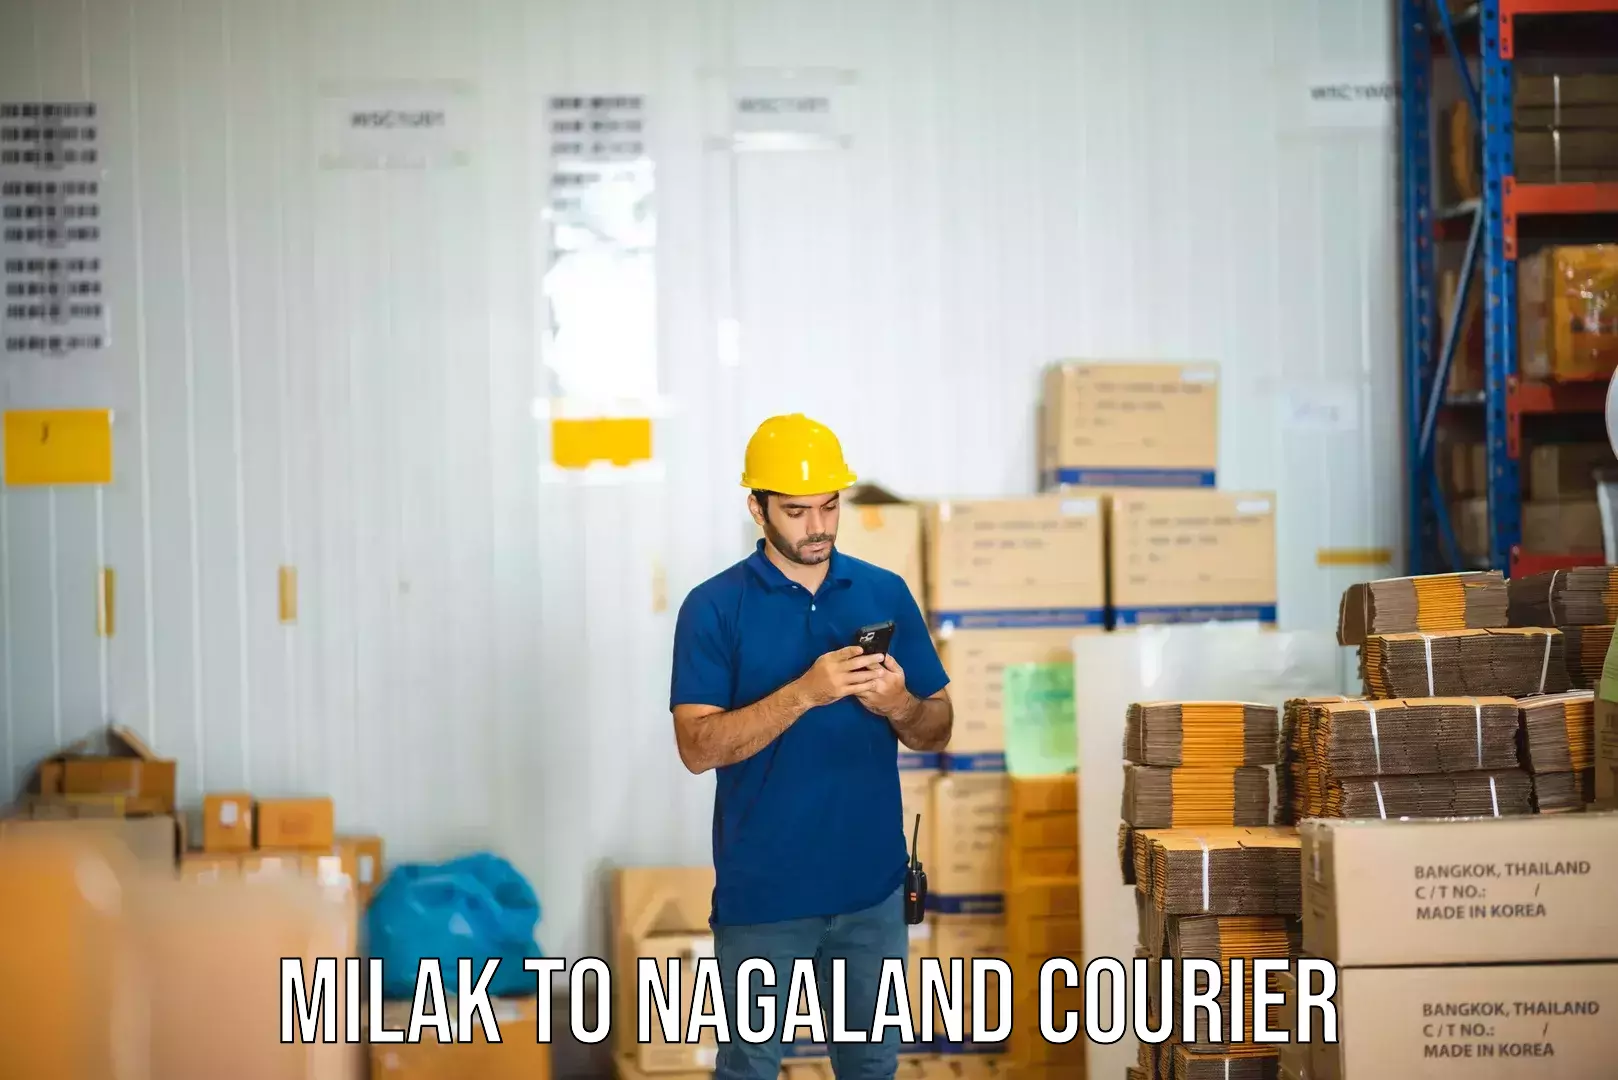 On-call courier service Milak to Mon